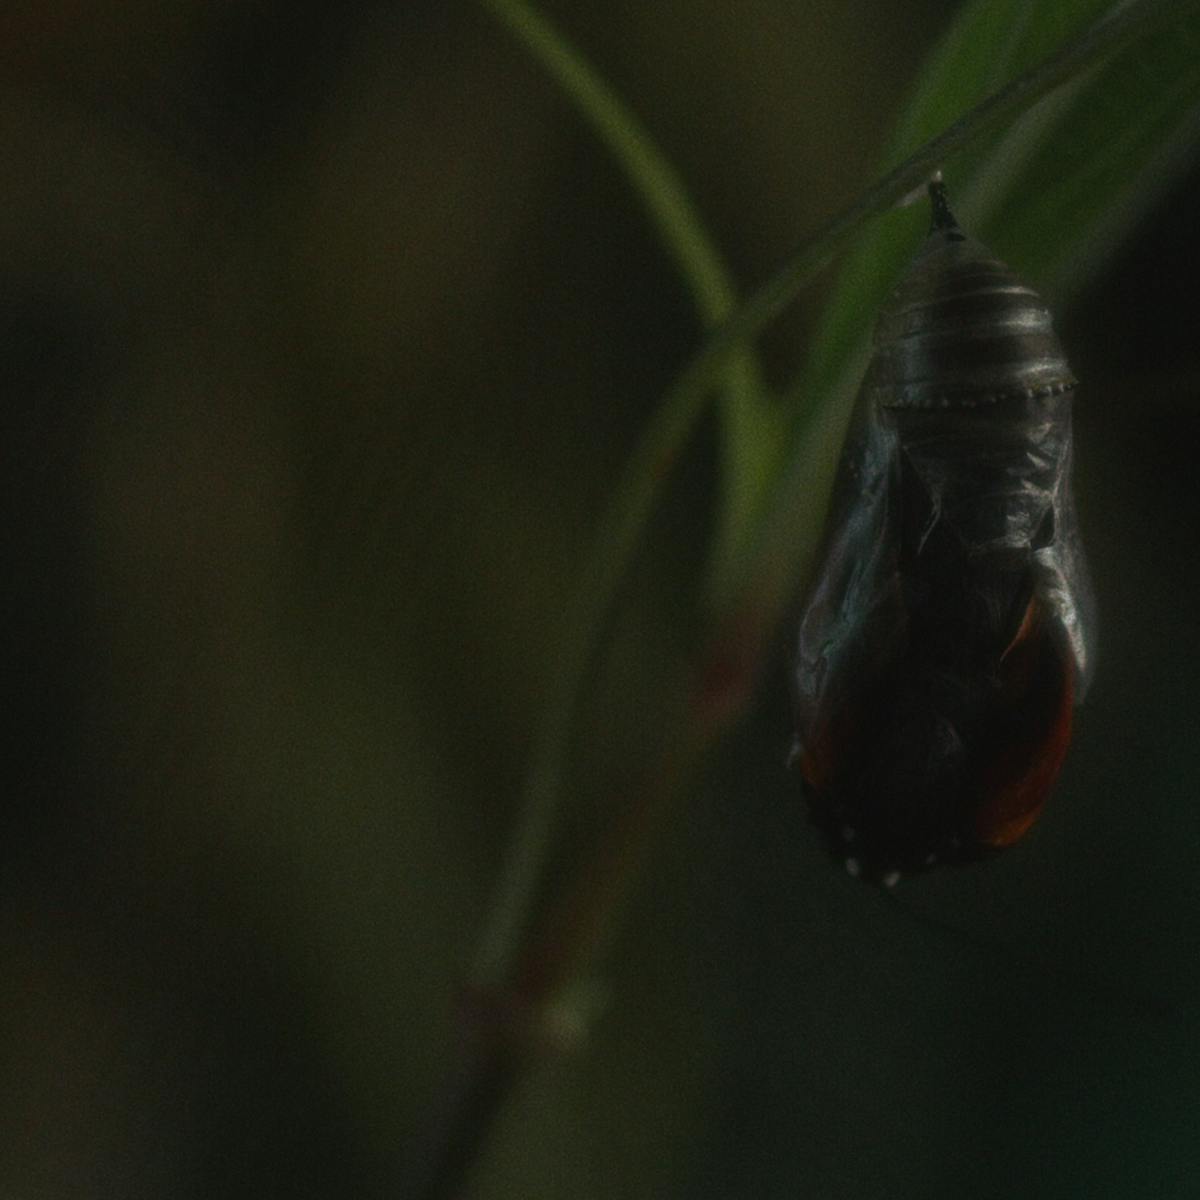 A black cocoon hangs from a plant.